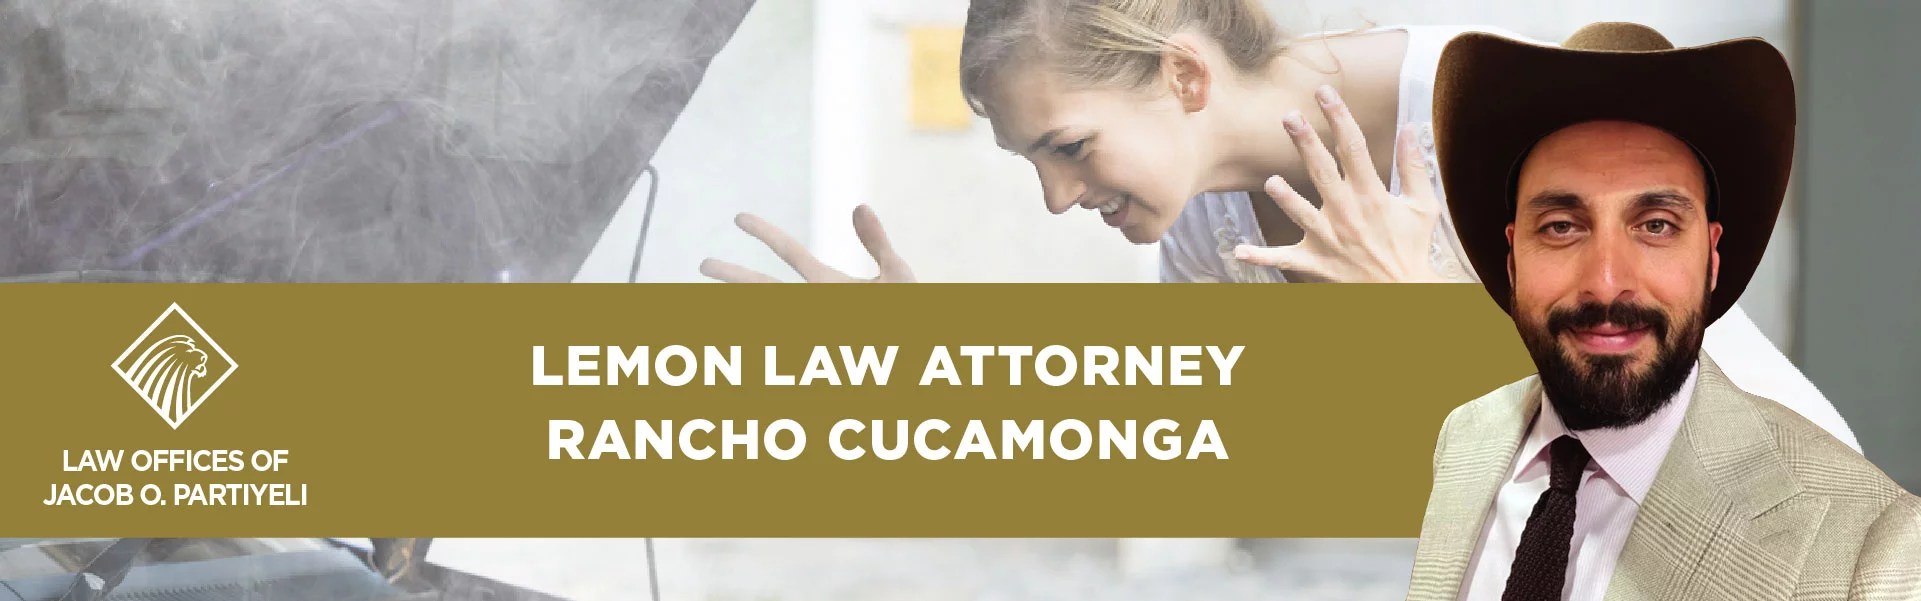 Automobile Accident Attorney In Rancho Cucamonga